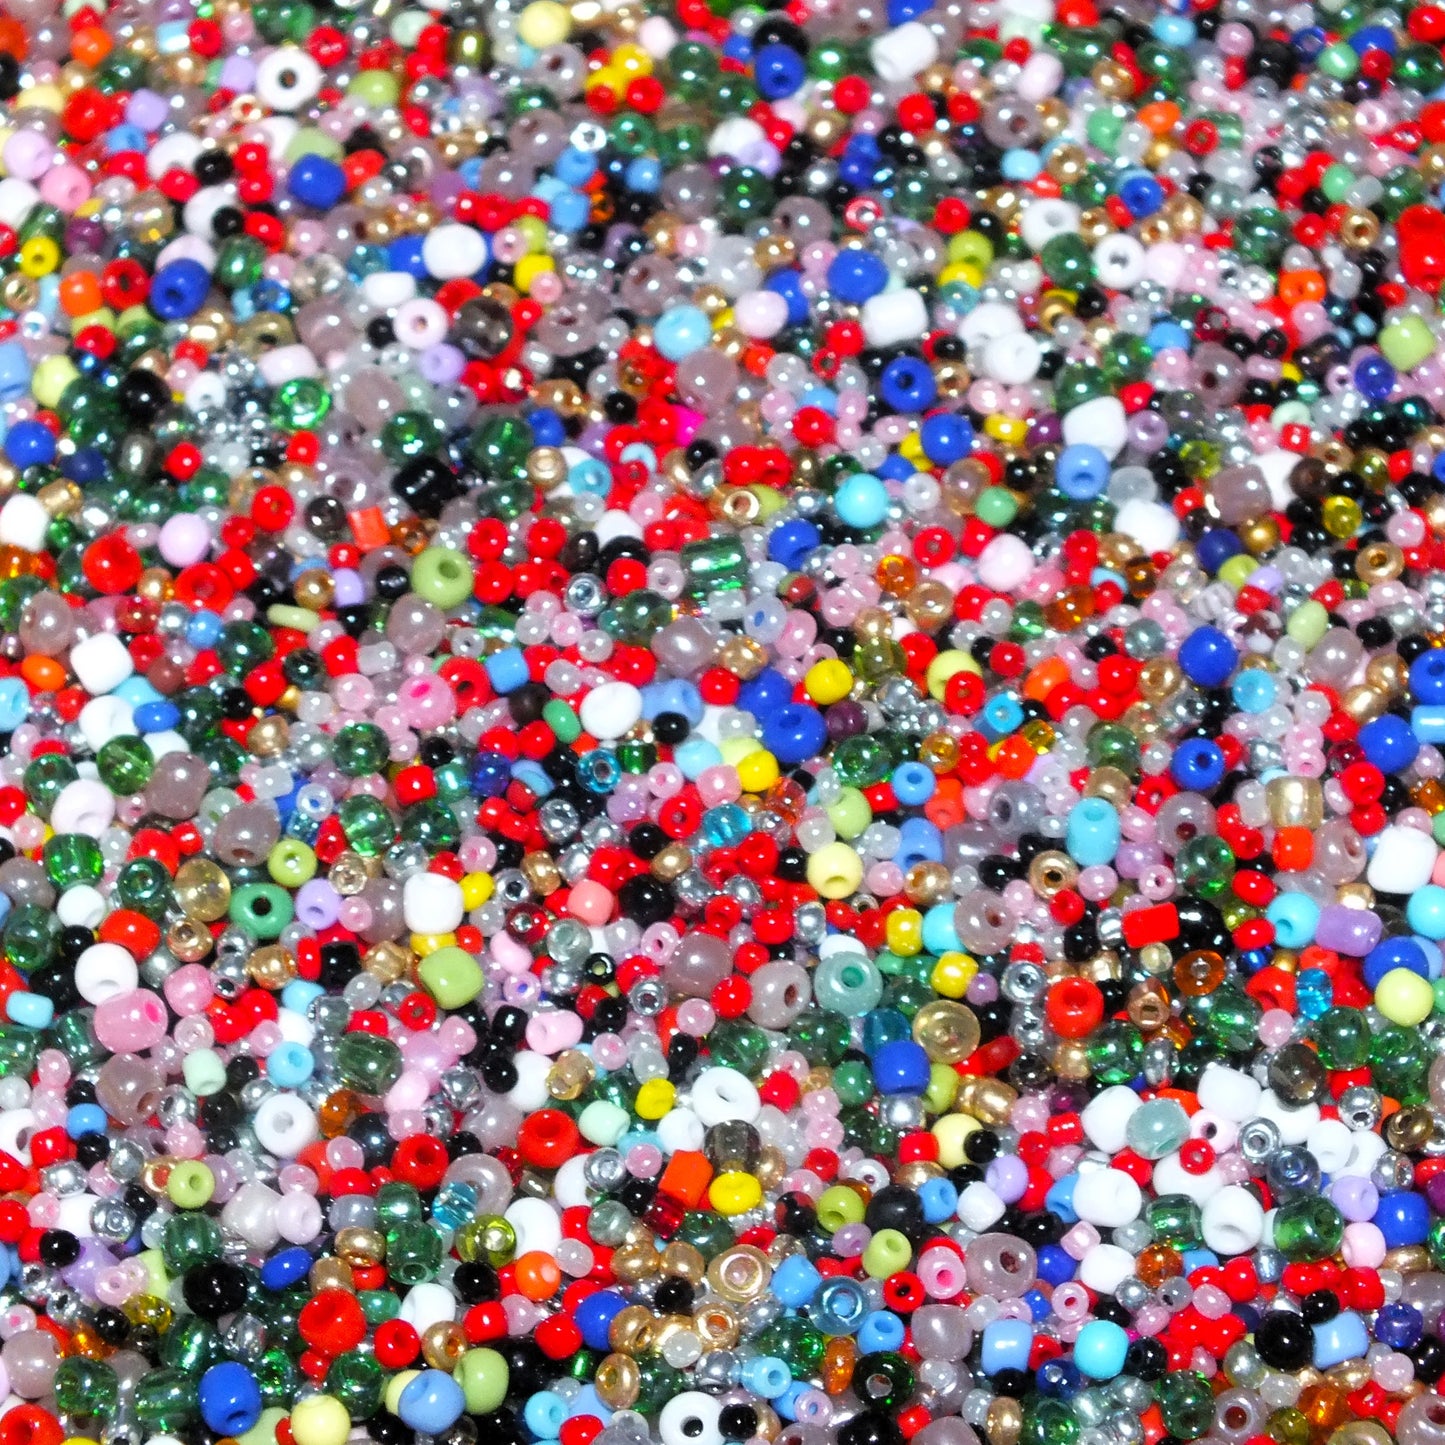 2~4.5mm x 1~5mm random mix glass seed beads, 50g - 1kg - a mixture of opaque, translucent, pearlised, silver lined